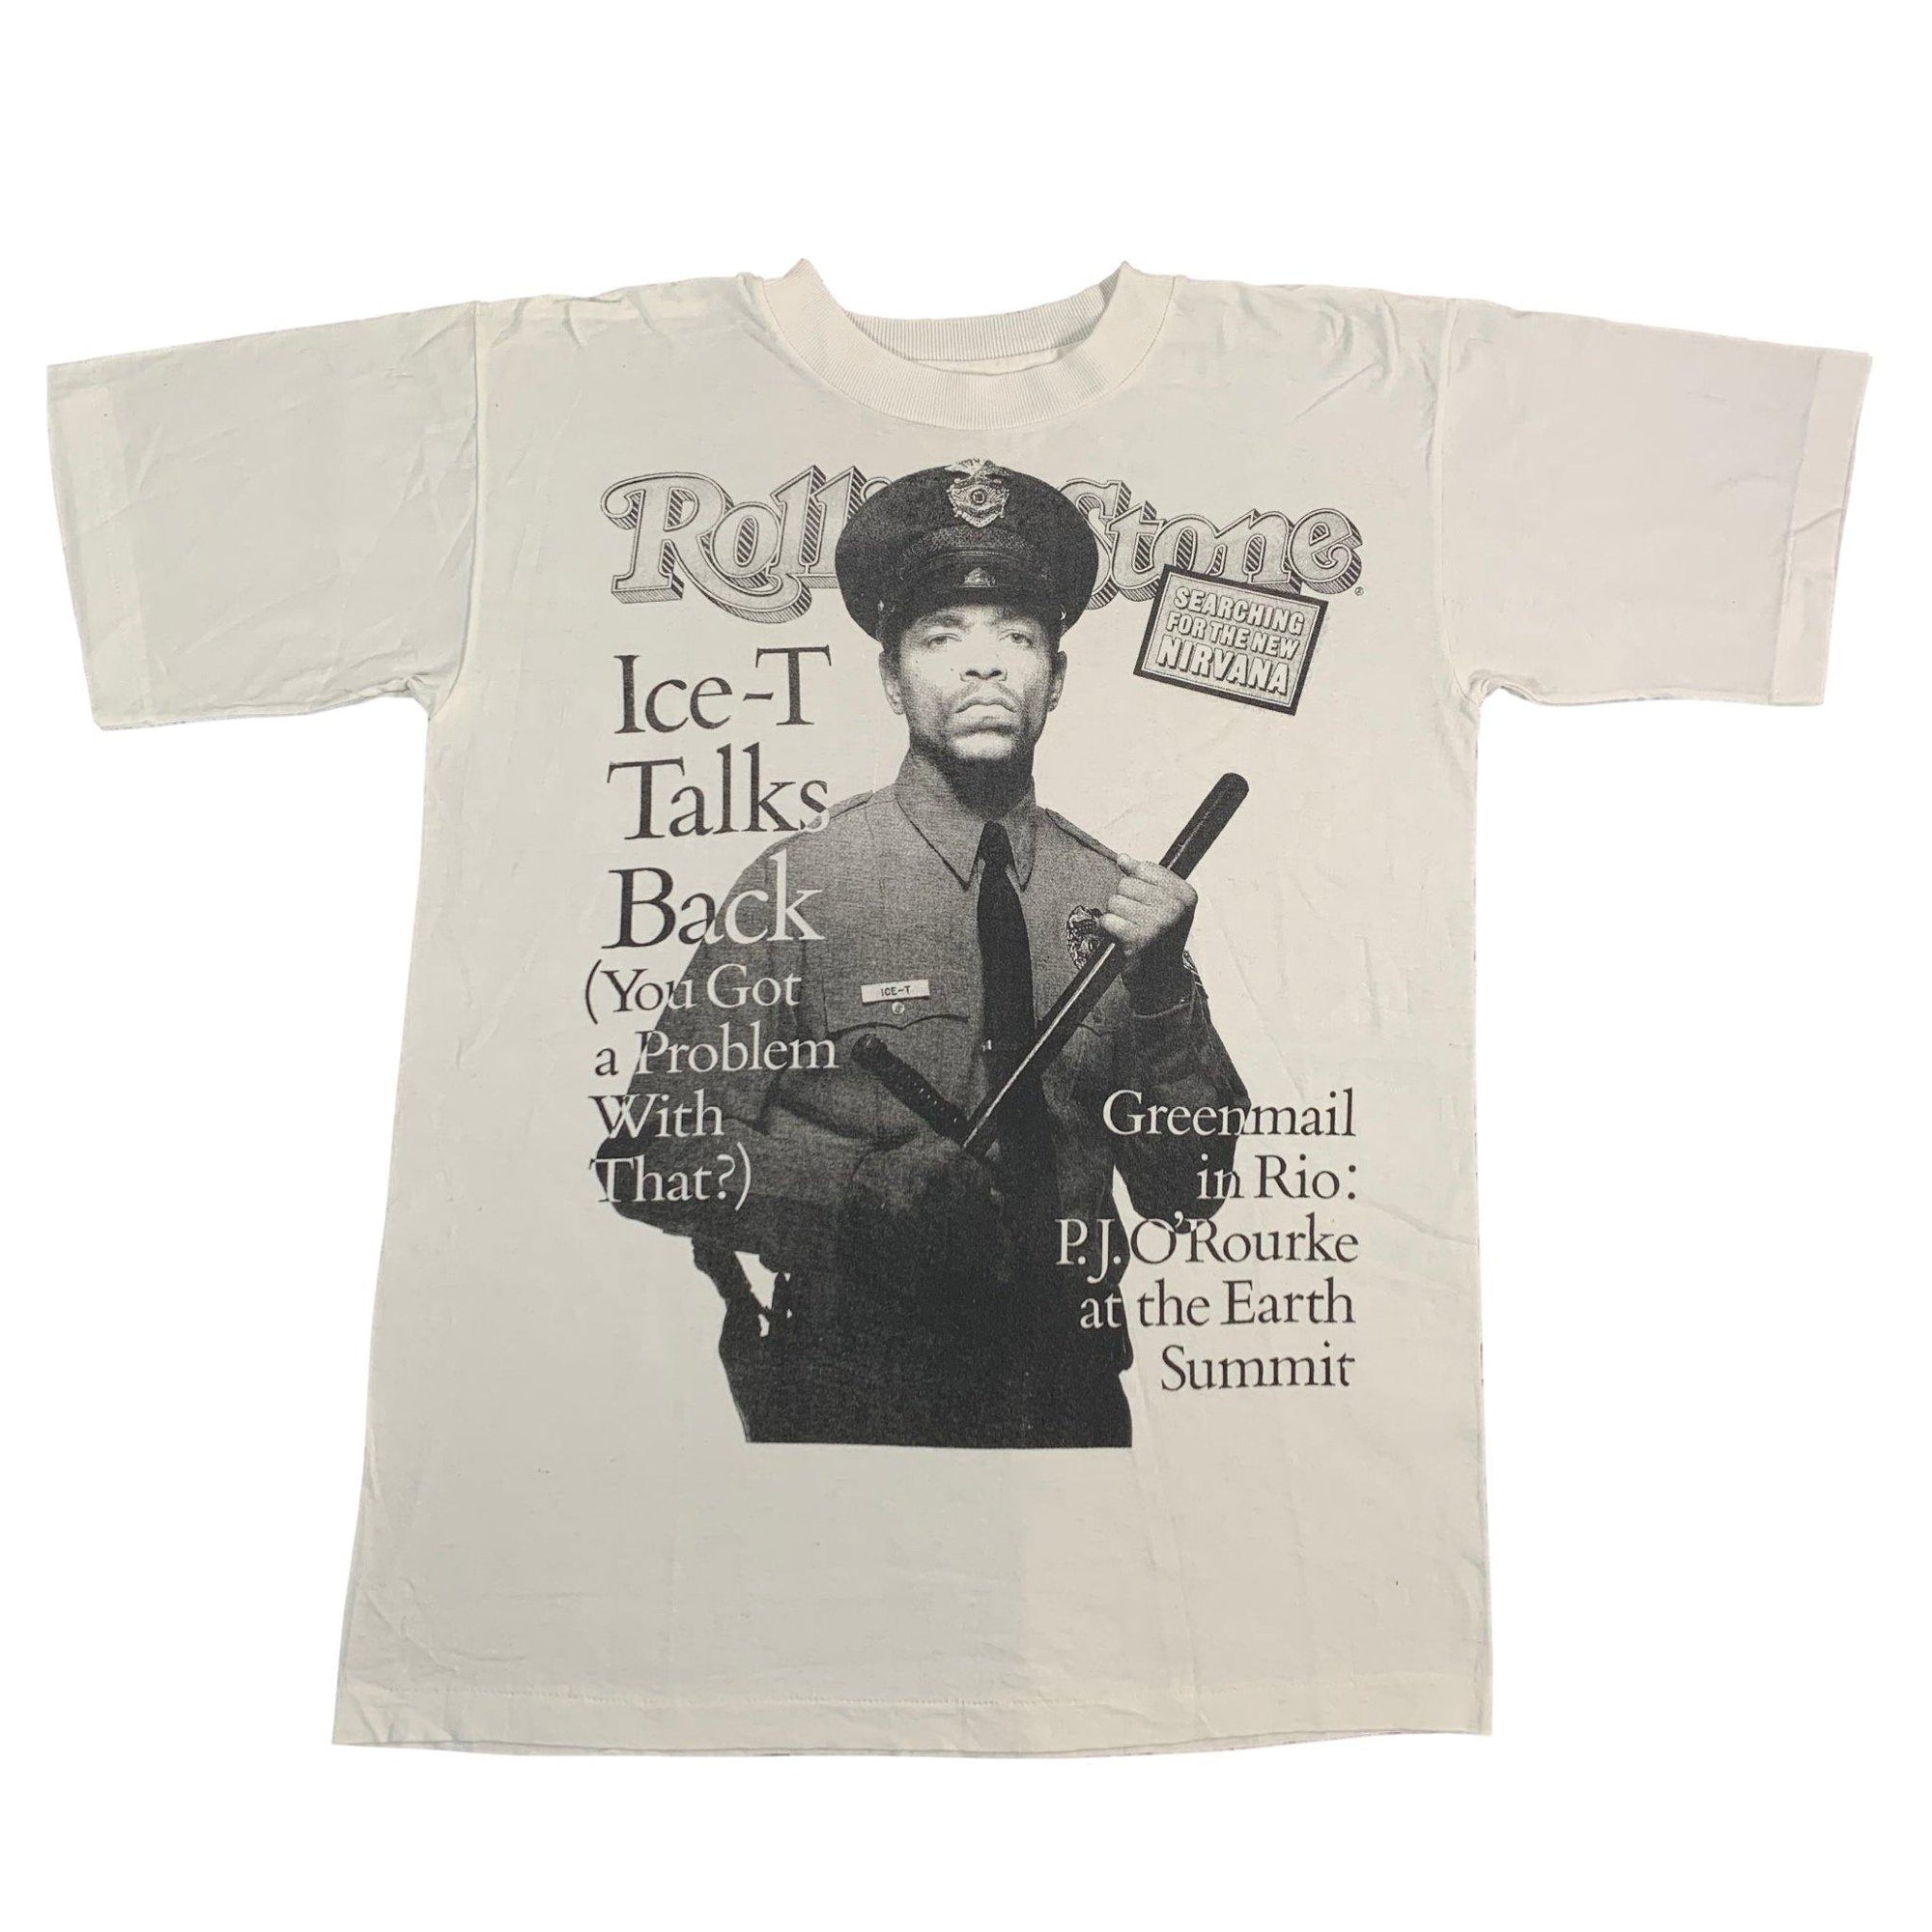 Vintage Ice-T "Rolling Stone Cover" T-Shirt - jointcustodydc